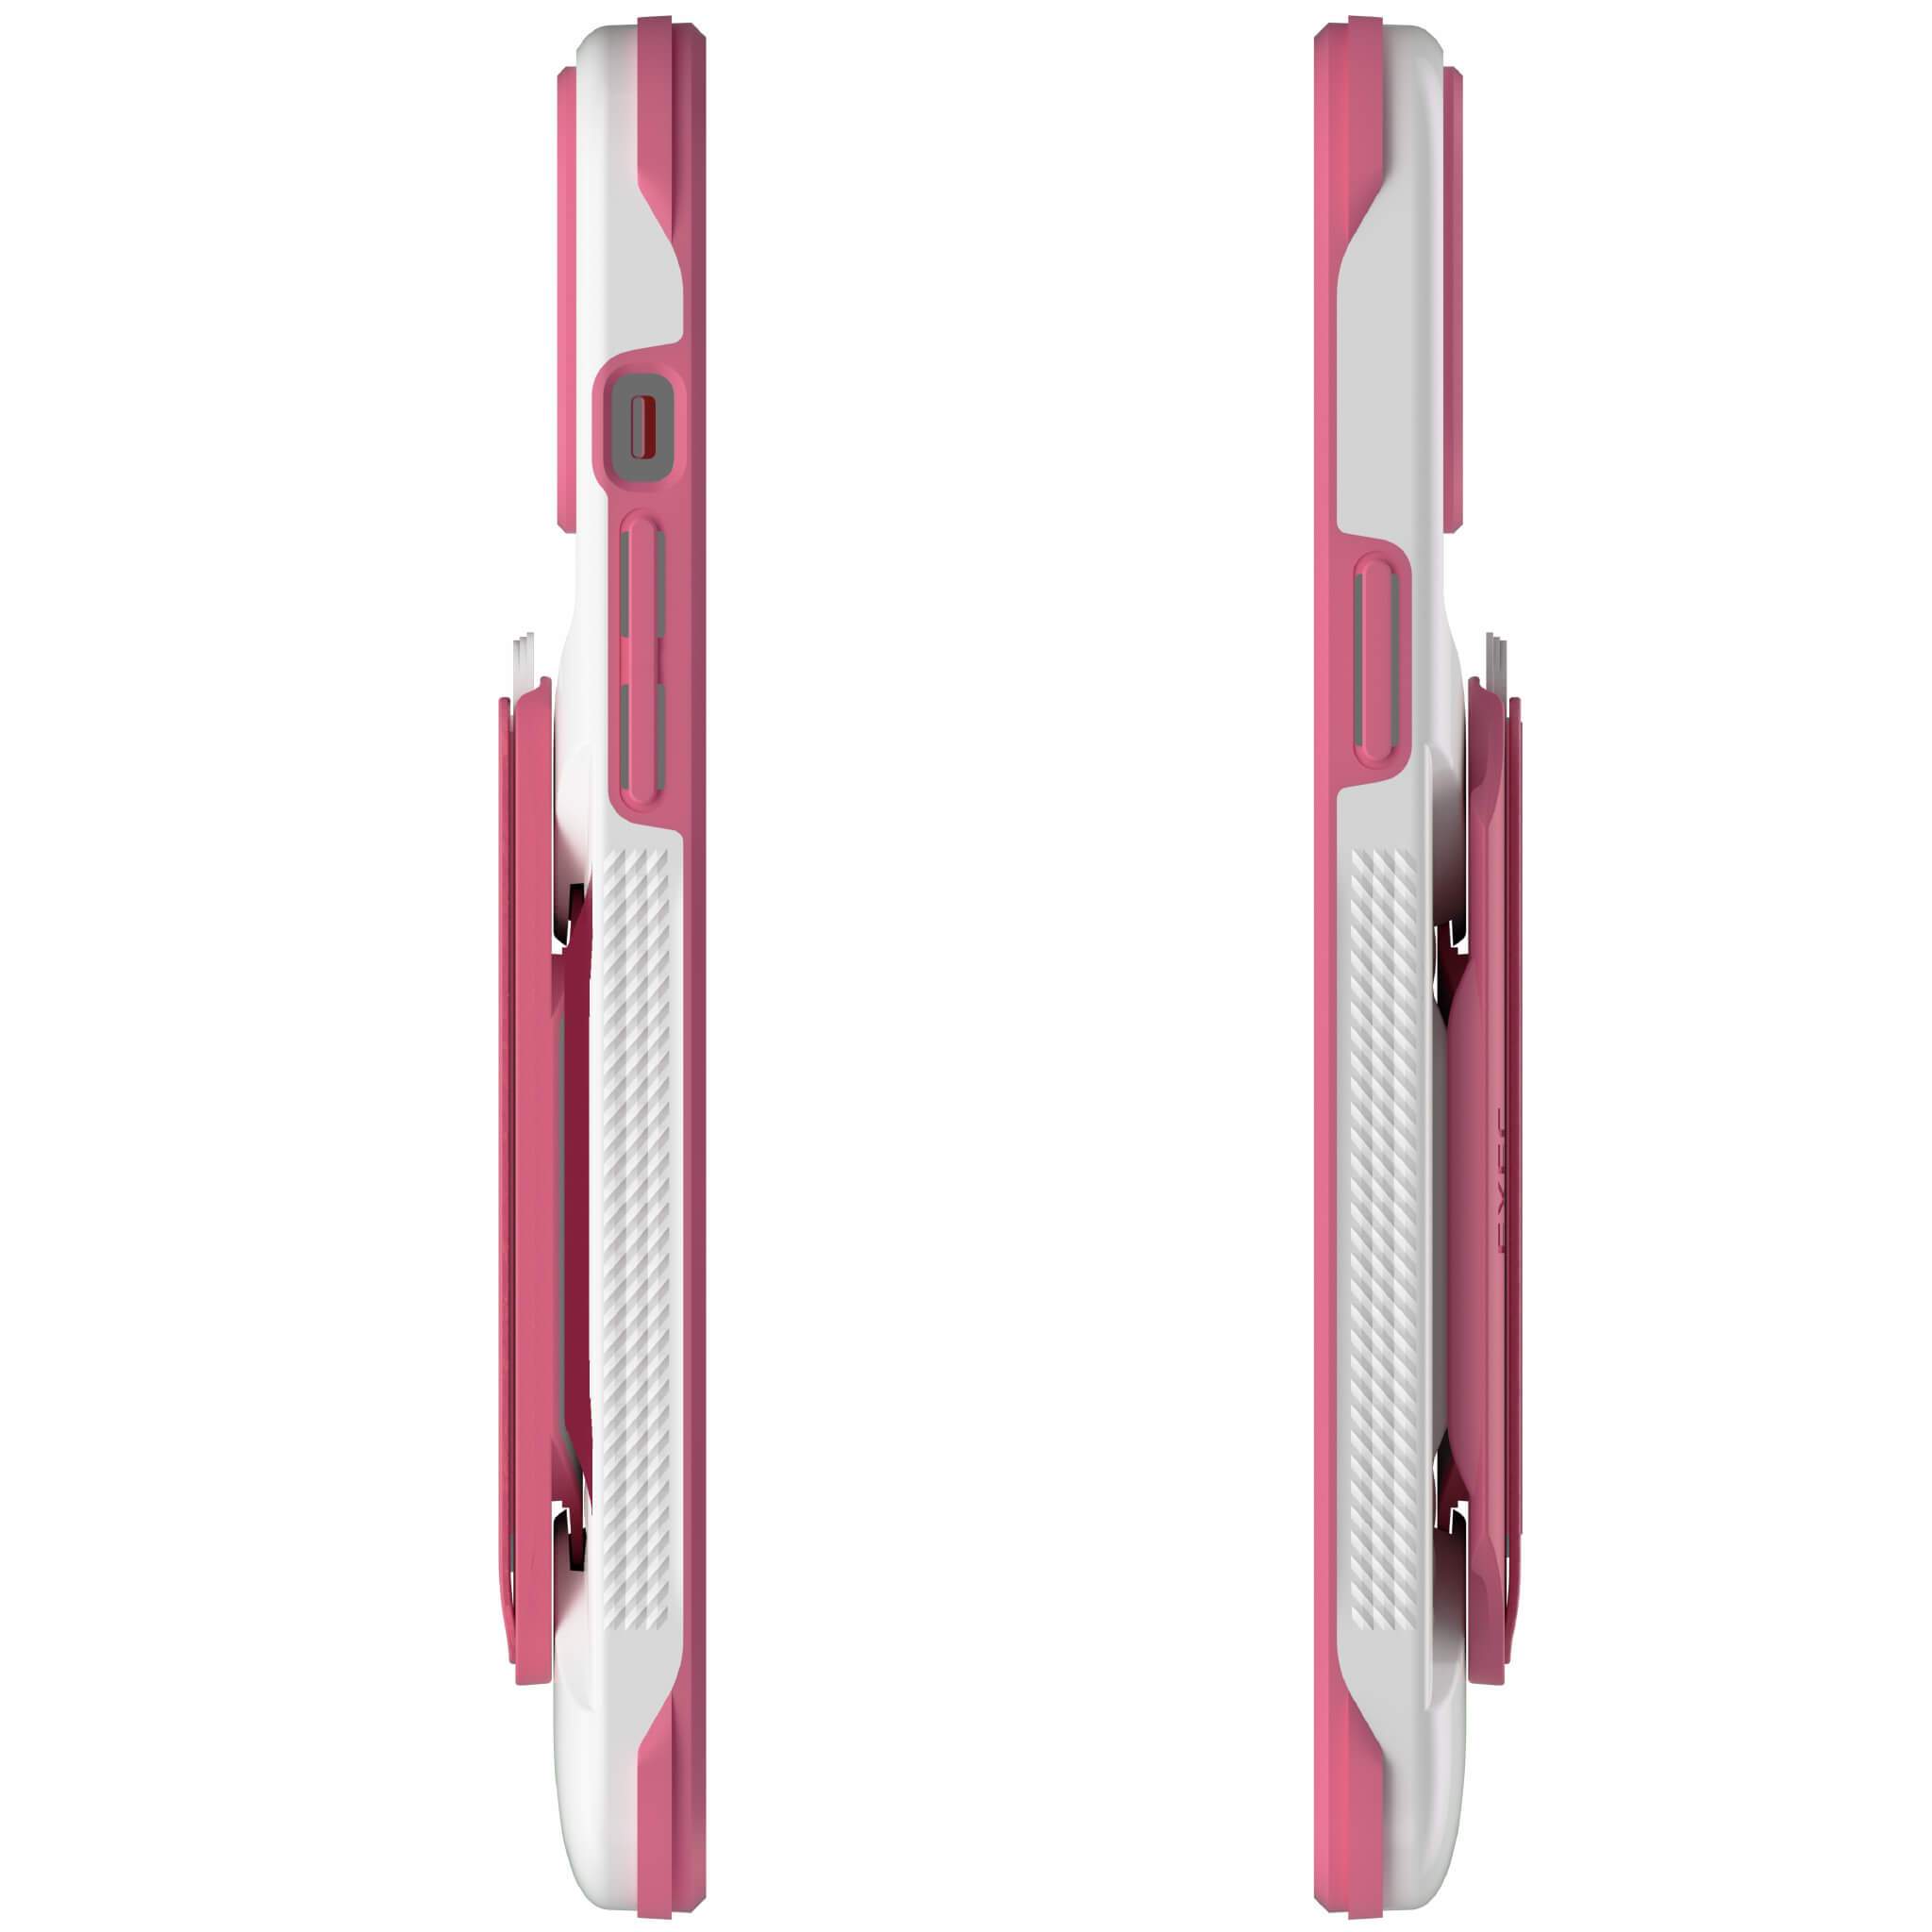 iPhone 12 Pro Max  - Magnetic Wallet Case with Card Holder [Pink]